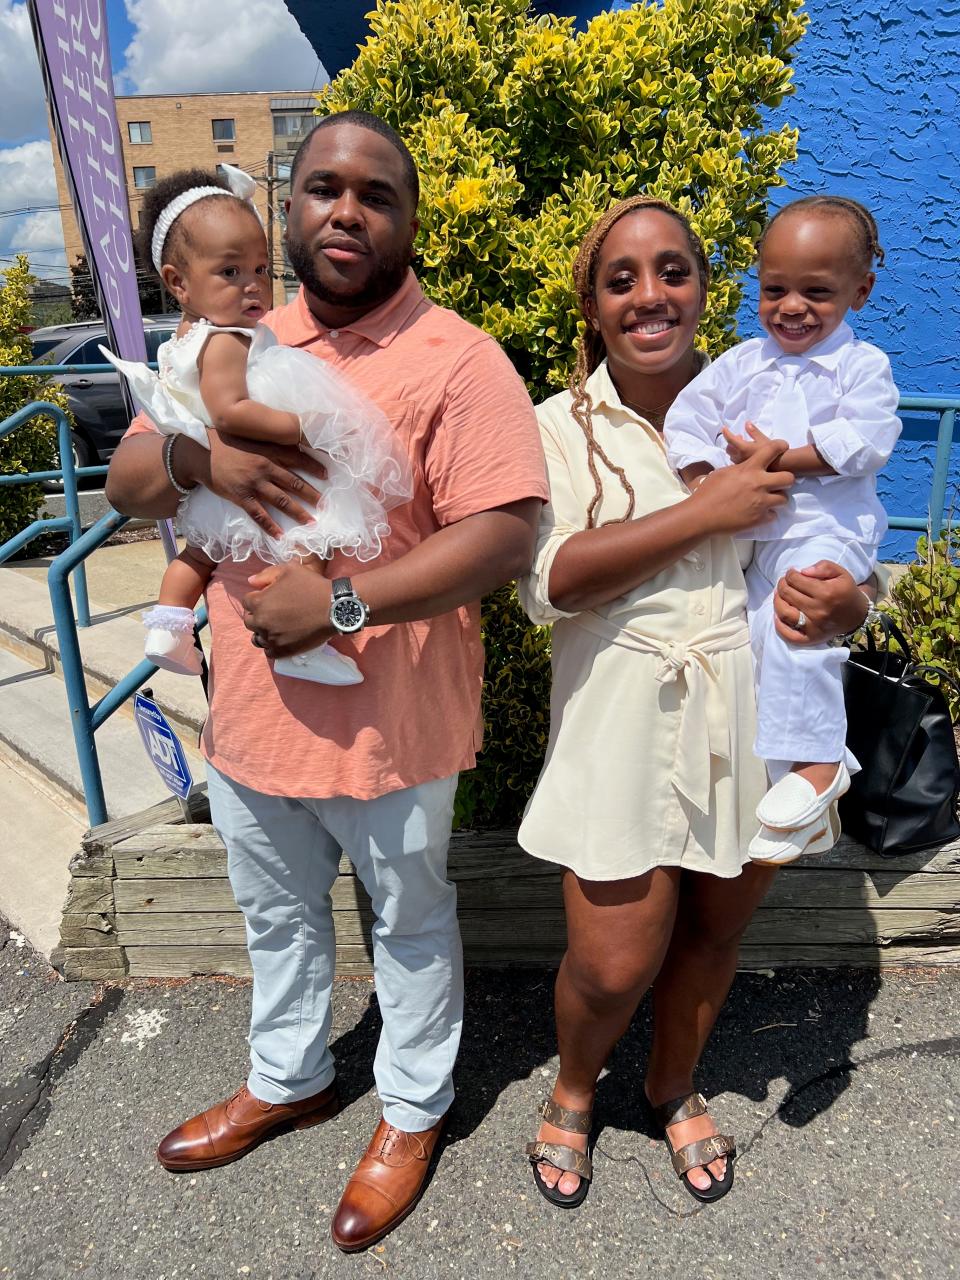 New Teaneck football coach Cekuan James with his wife Atyana, who is cheerleader coach at Teaneck, and their children Carter and Cynai.